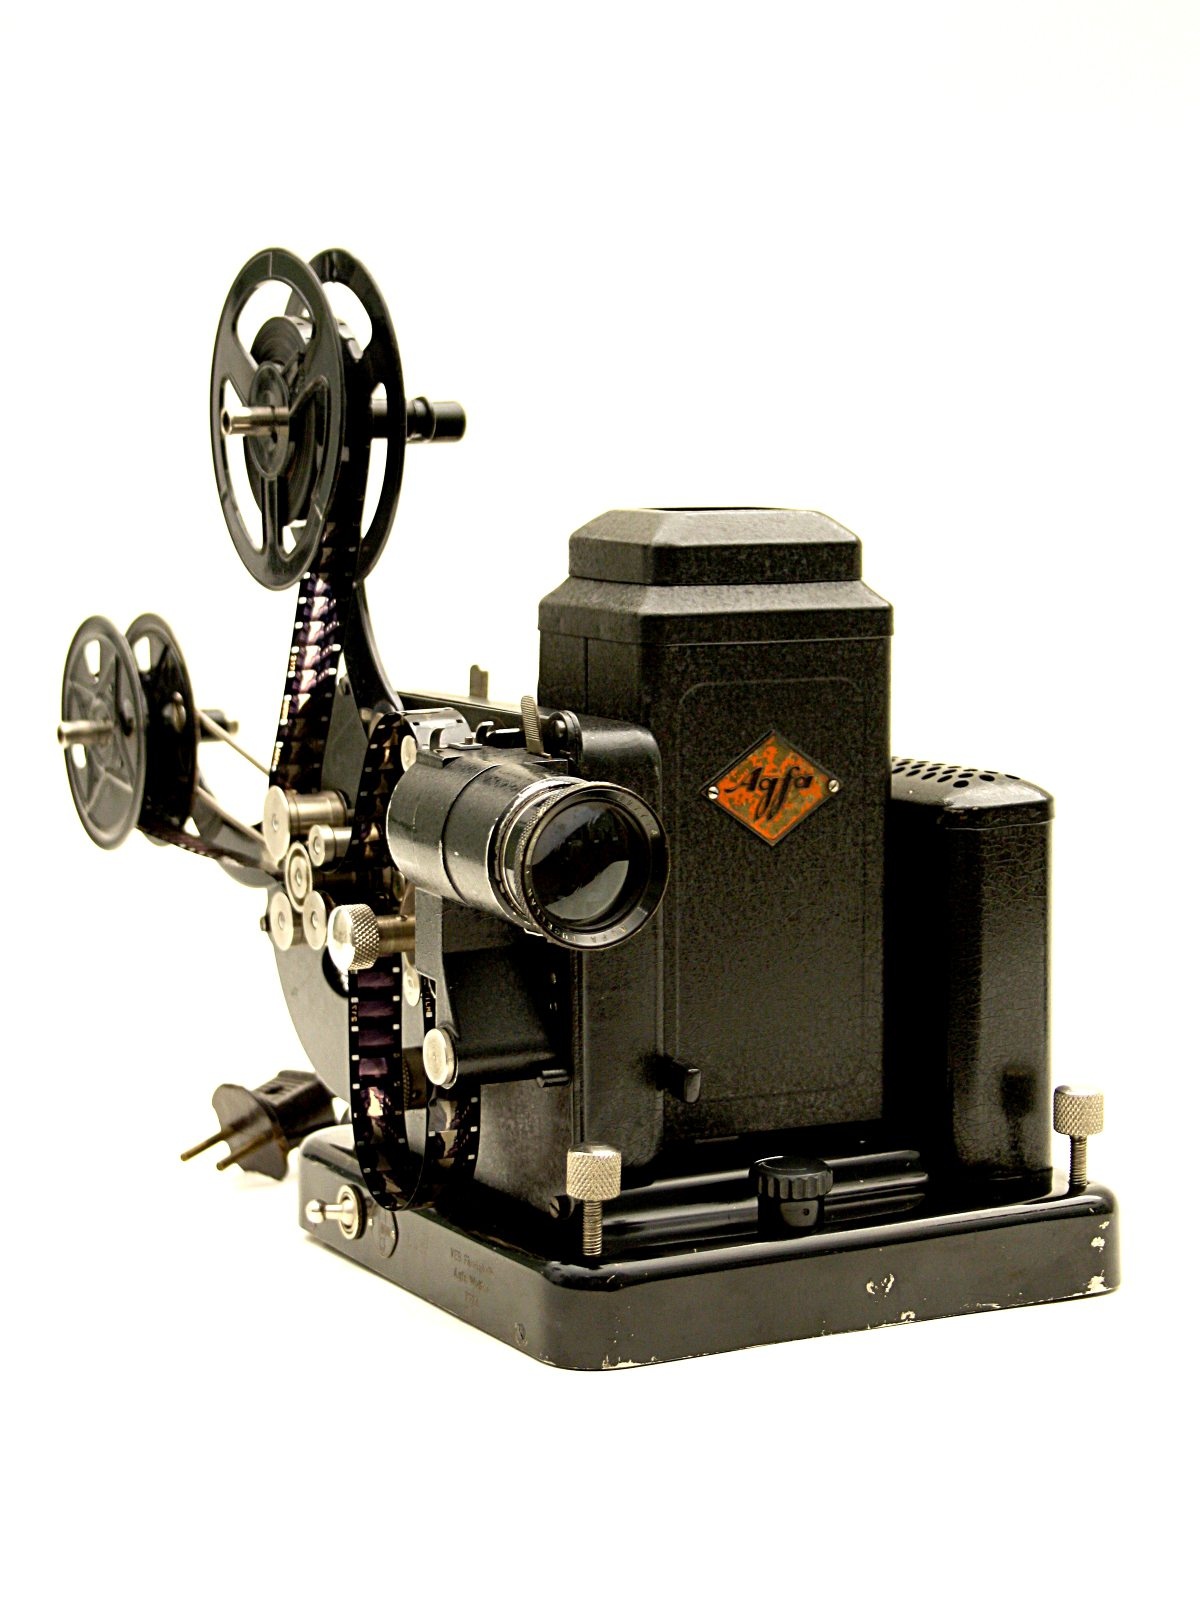 Schmalfilmprojektor &quot;Agfa Movector Super 16 C&quot; (Industrie- und Filmmuseum Wolfen CC BY-NC-SA)